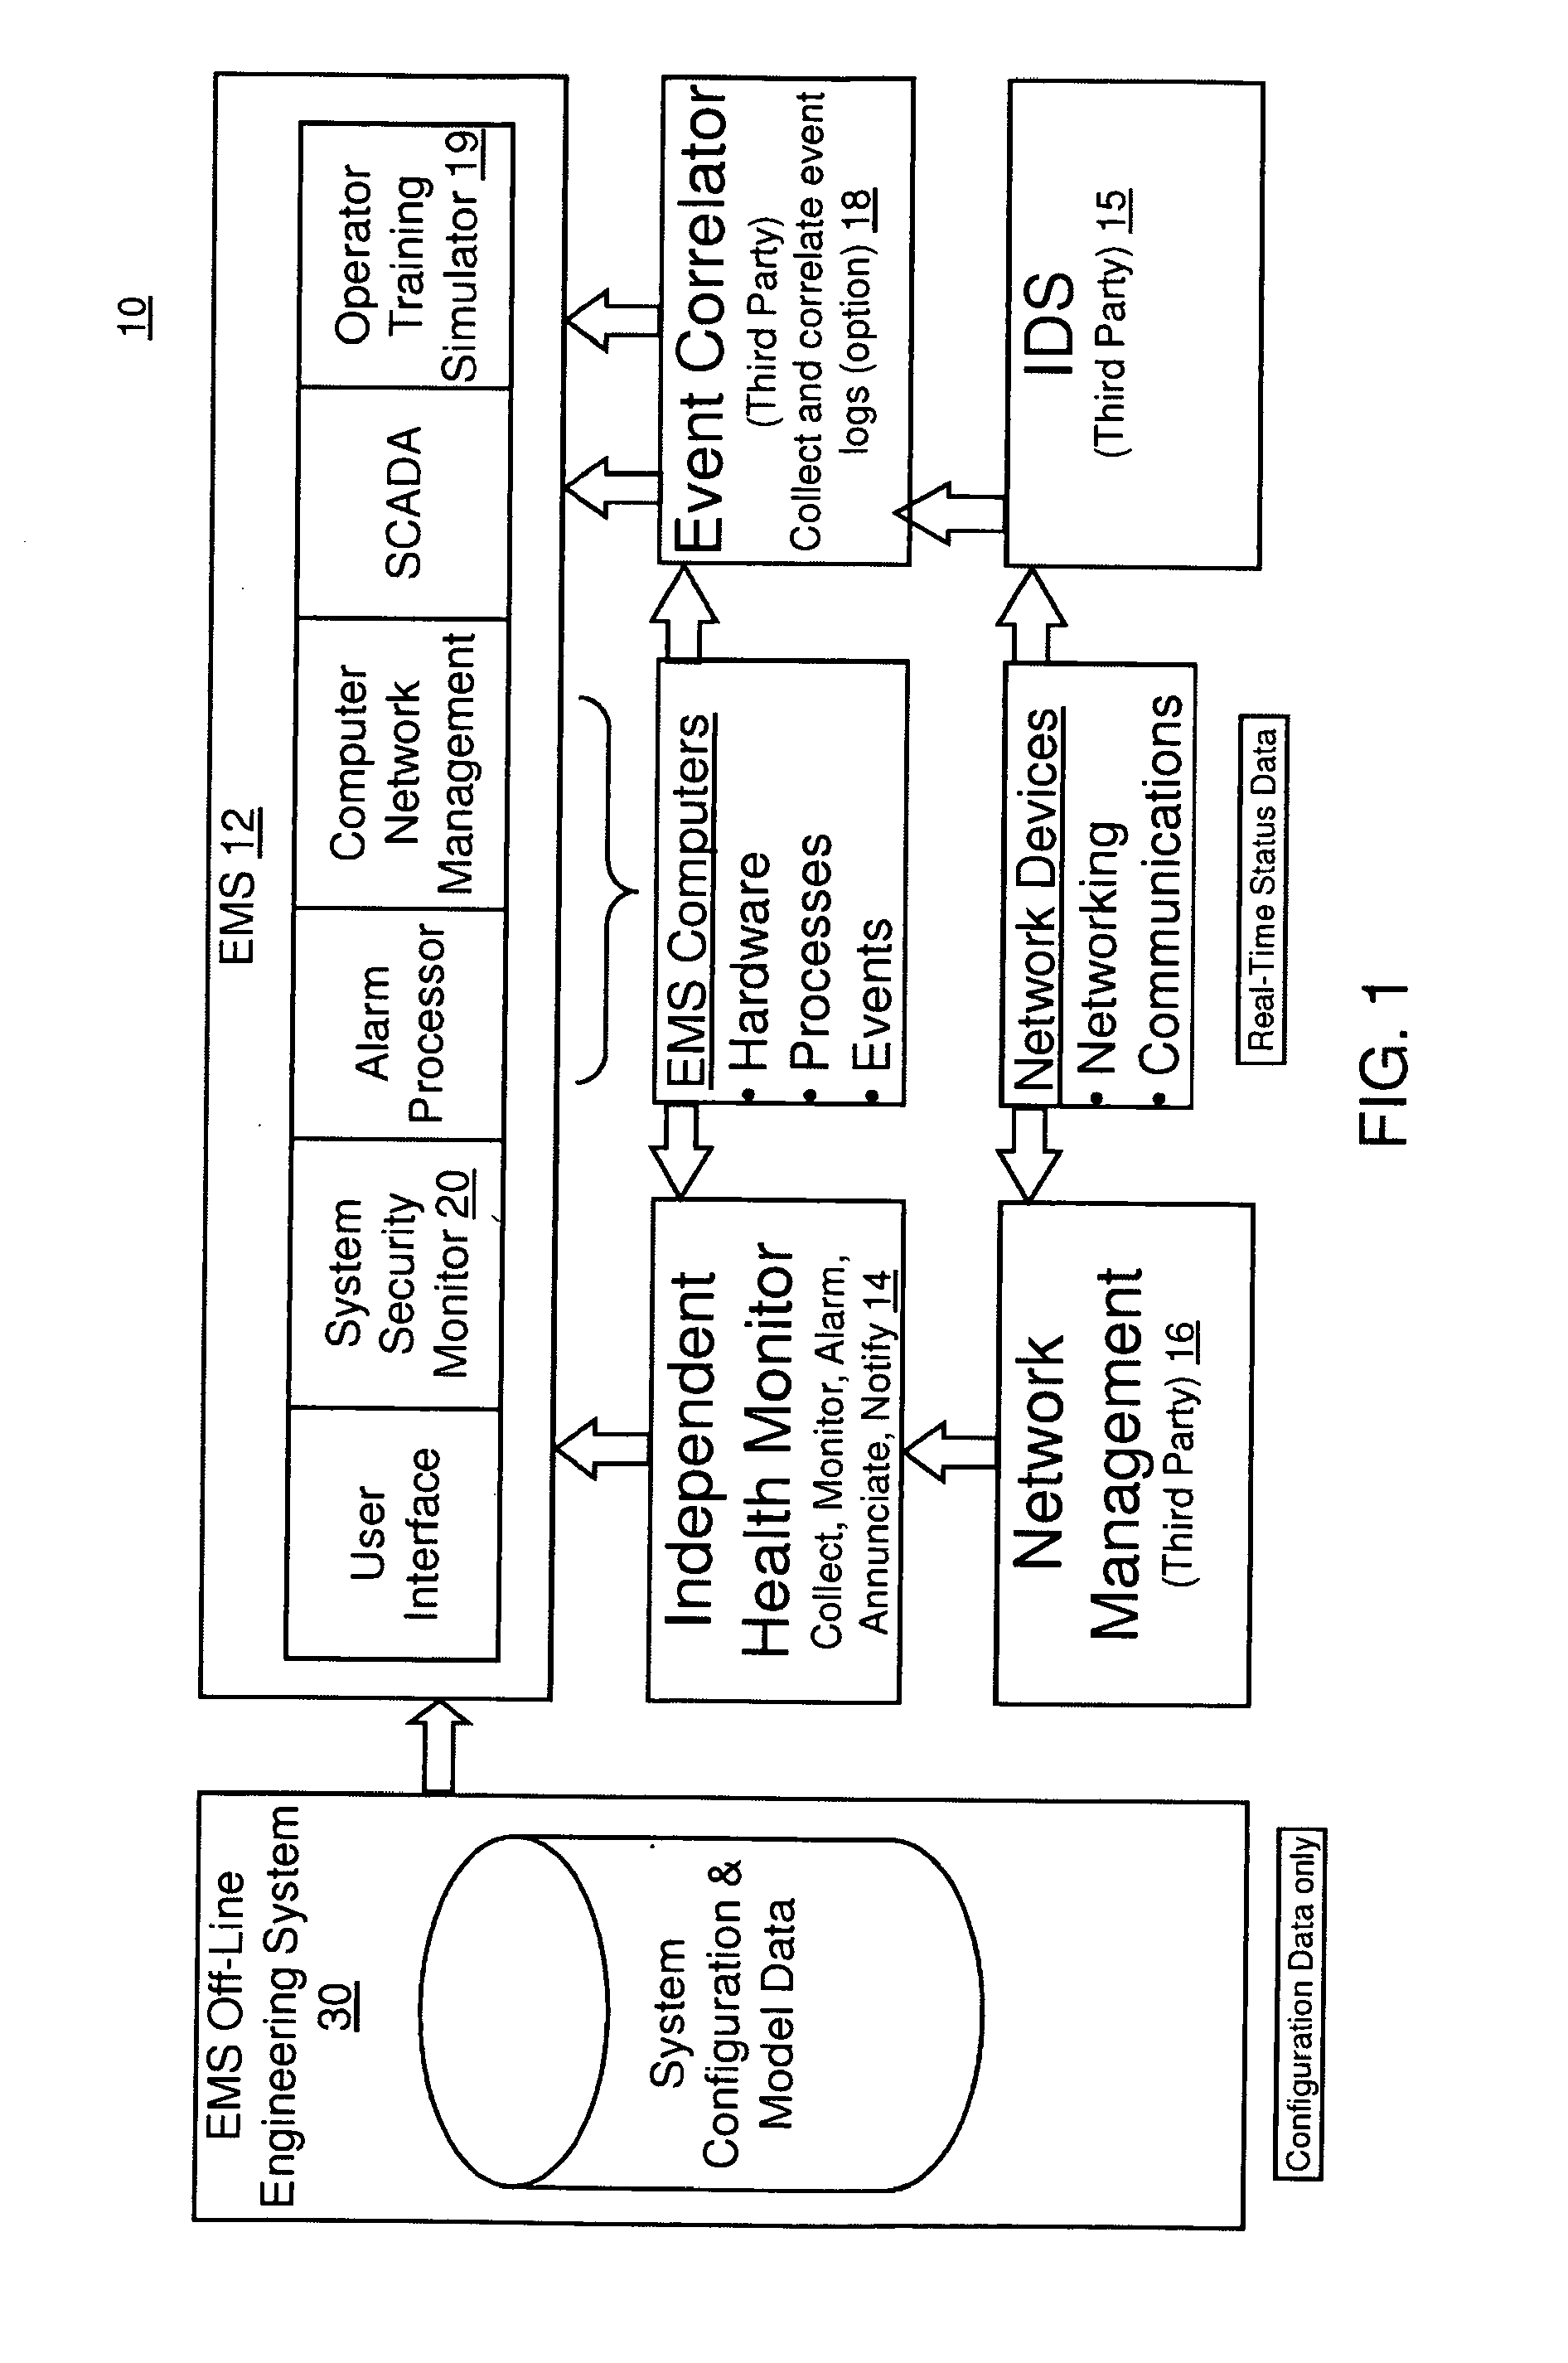 Method and system for cyber security management of industrial control systems